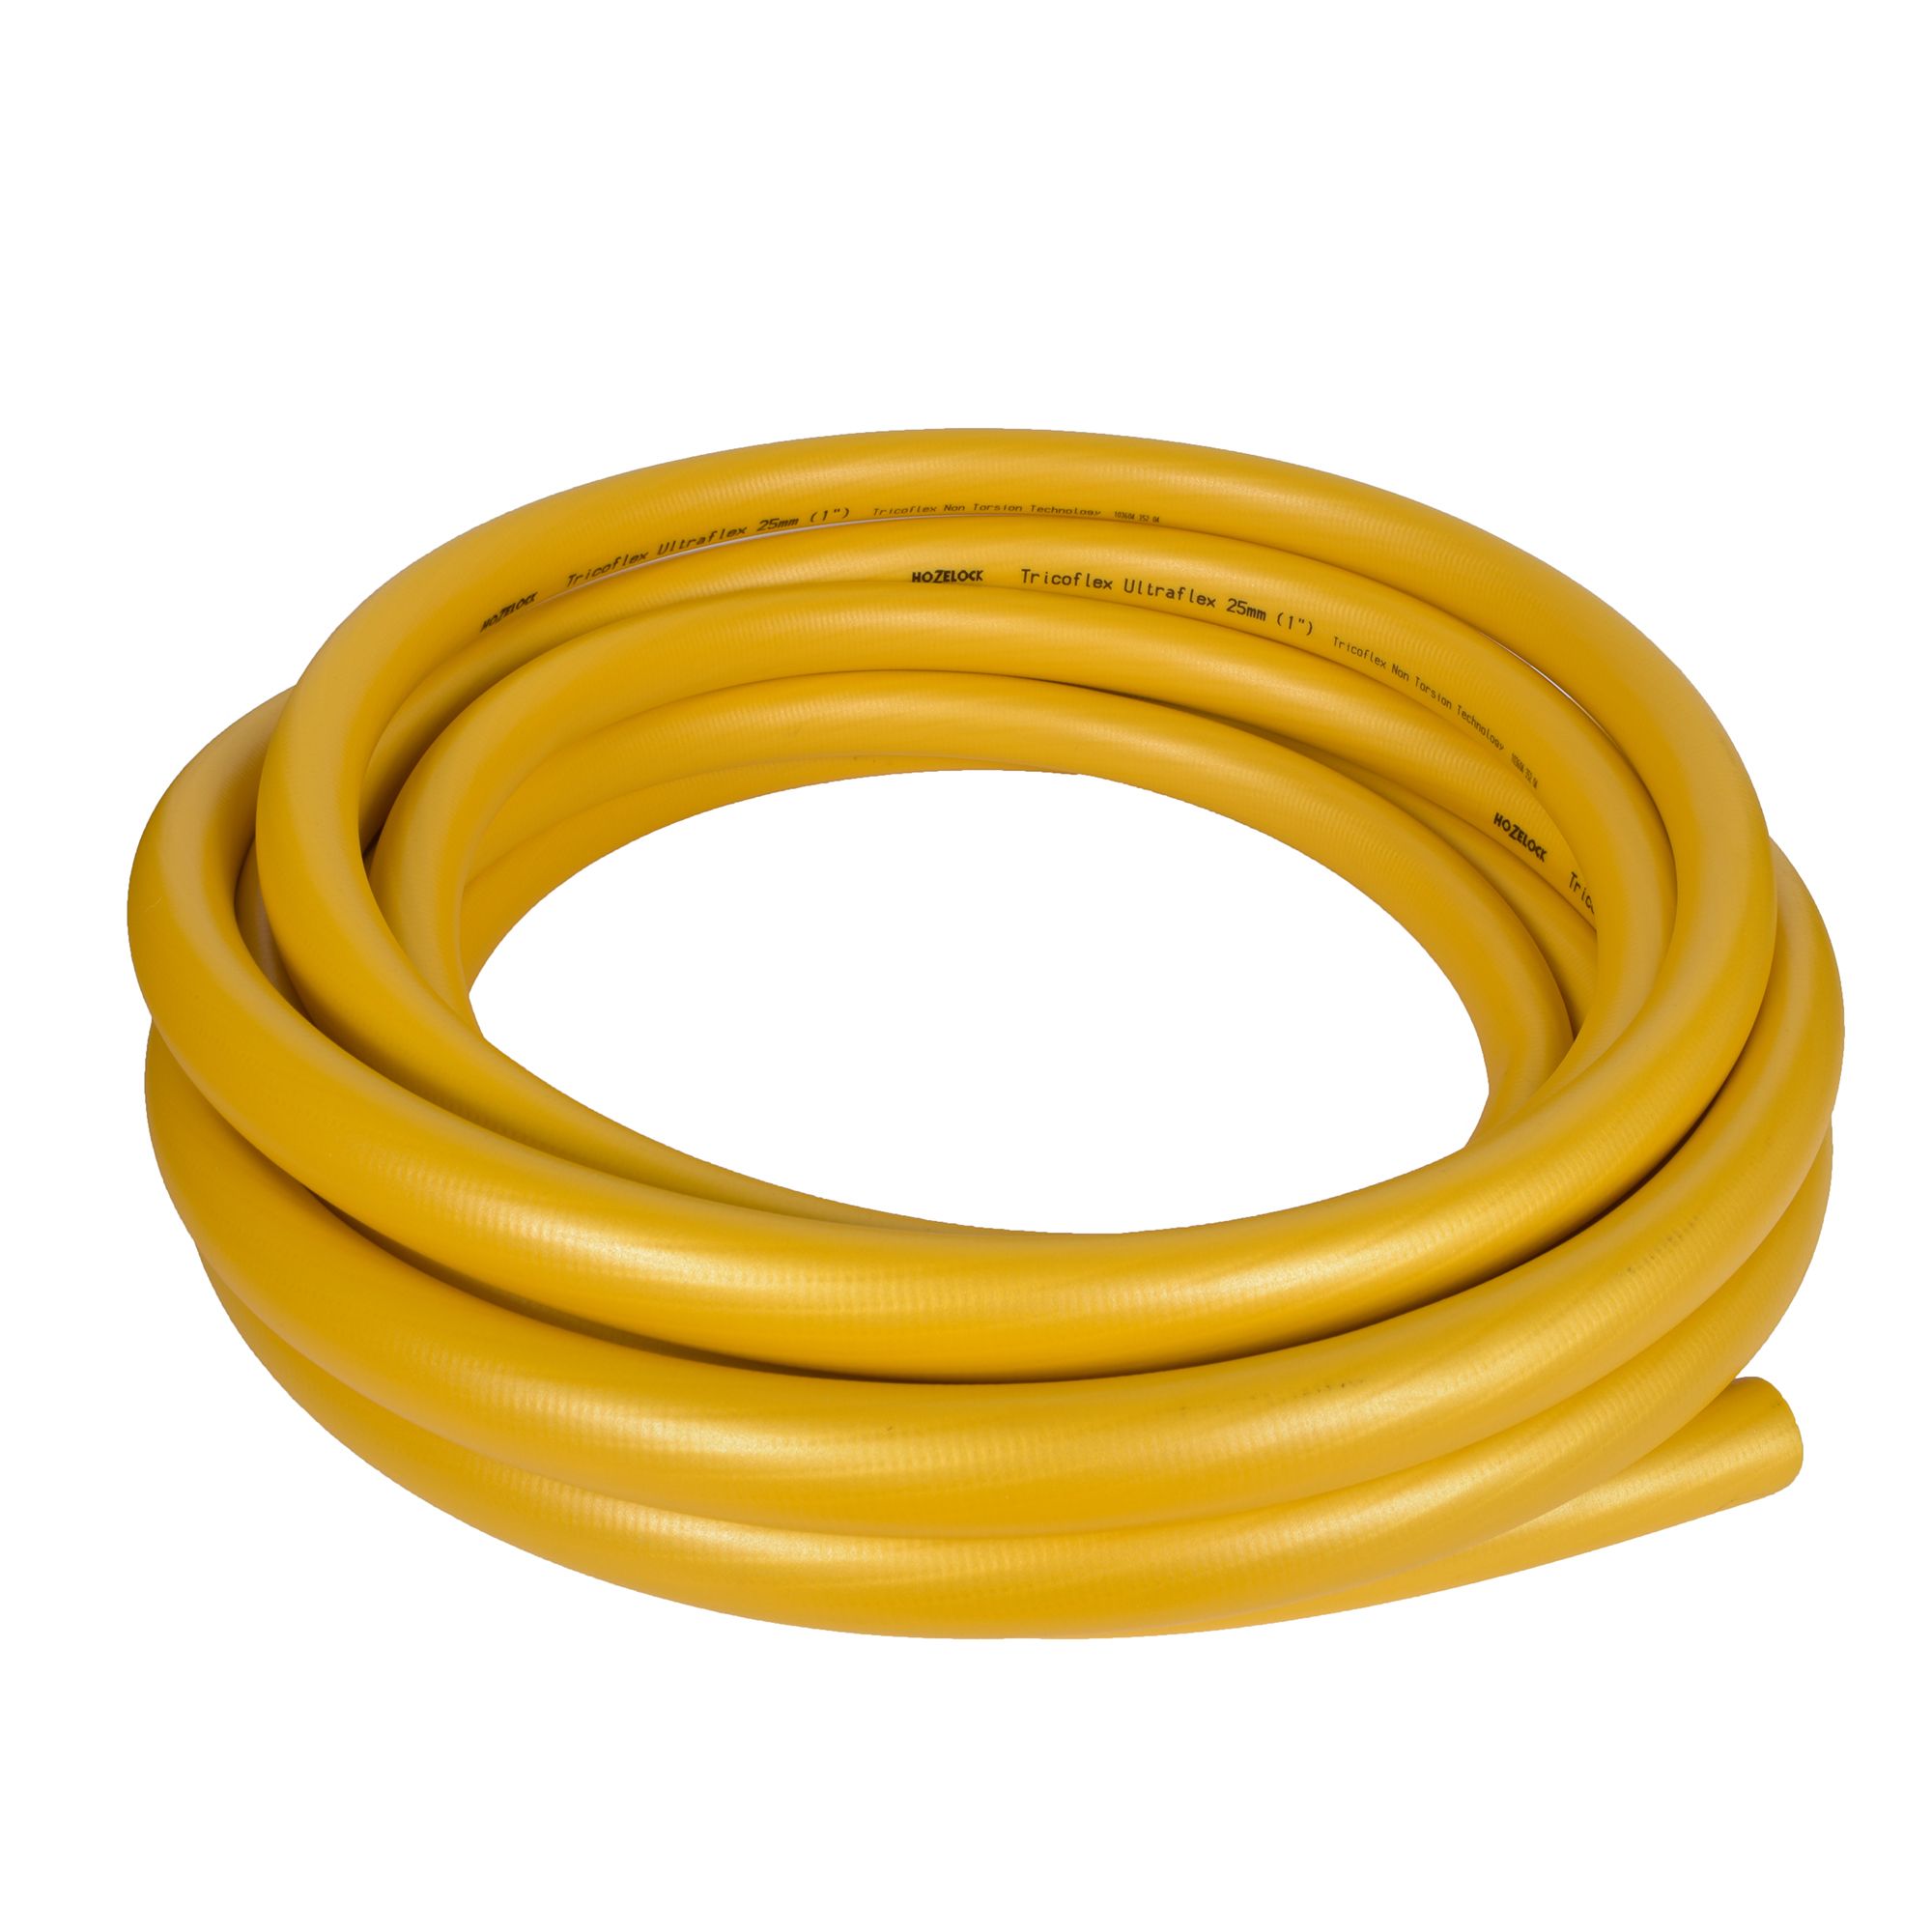 at (L)10m hose | reinforced DIY Hozelock pipe 6765 0000 Yellow B&Q 5-layer